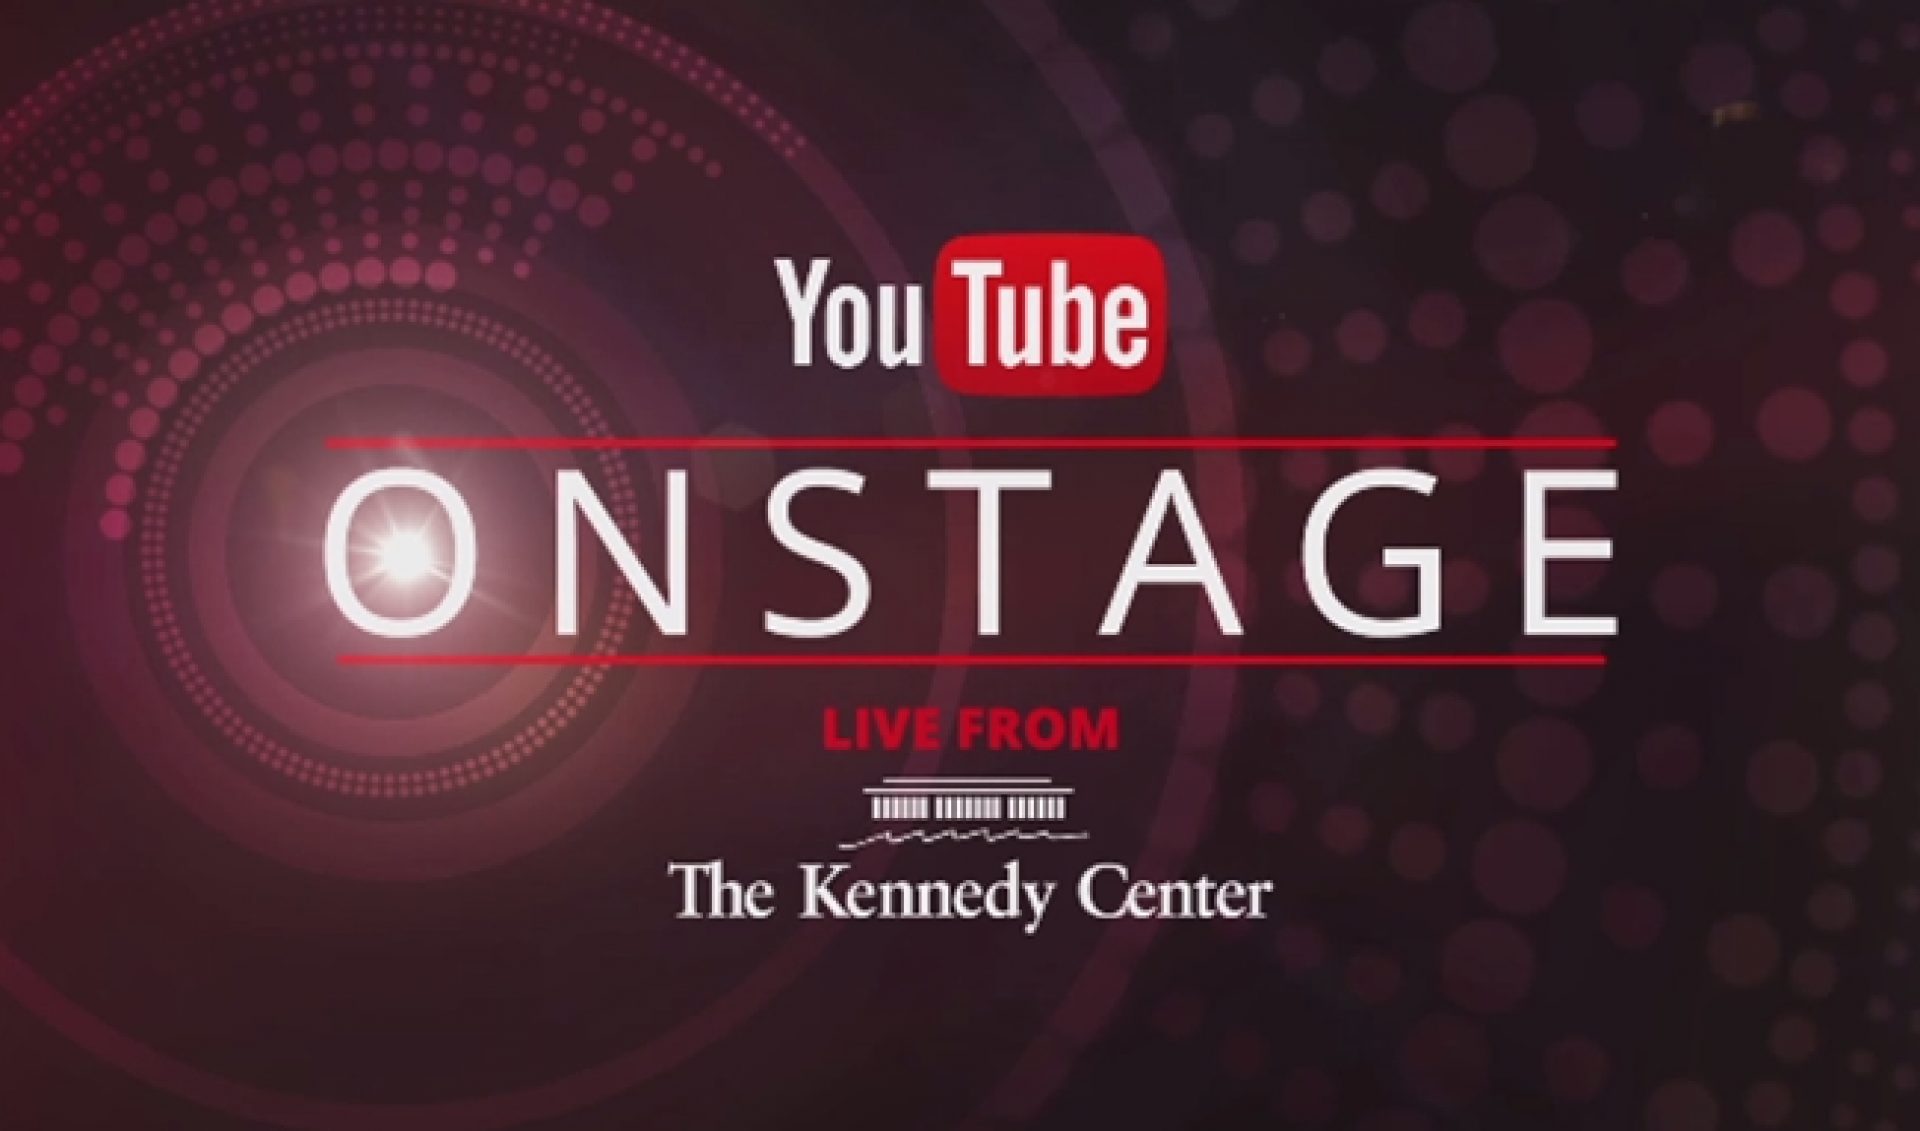 Here Is The Stream For YouTube Onstage Live At The Kennedy Center